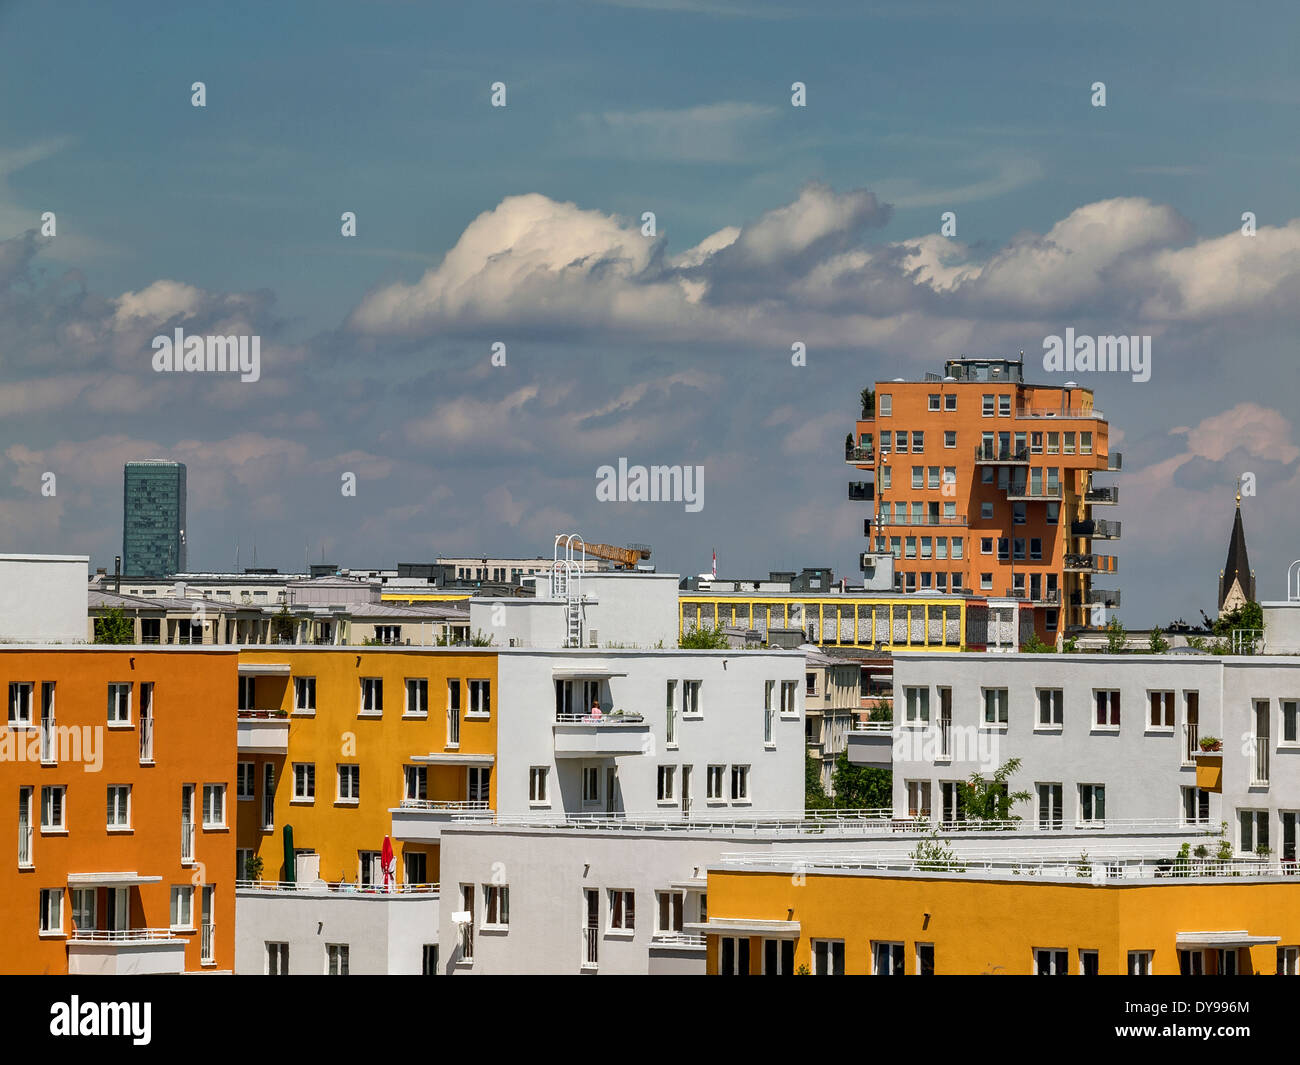 Residential complex, Munich, Germany Stock Photo